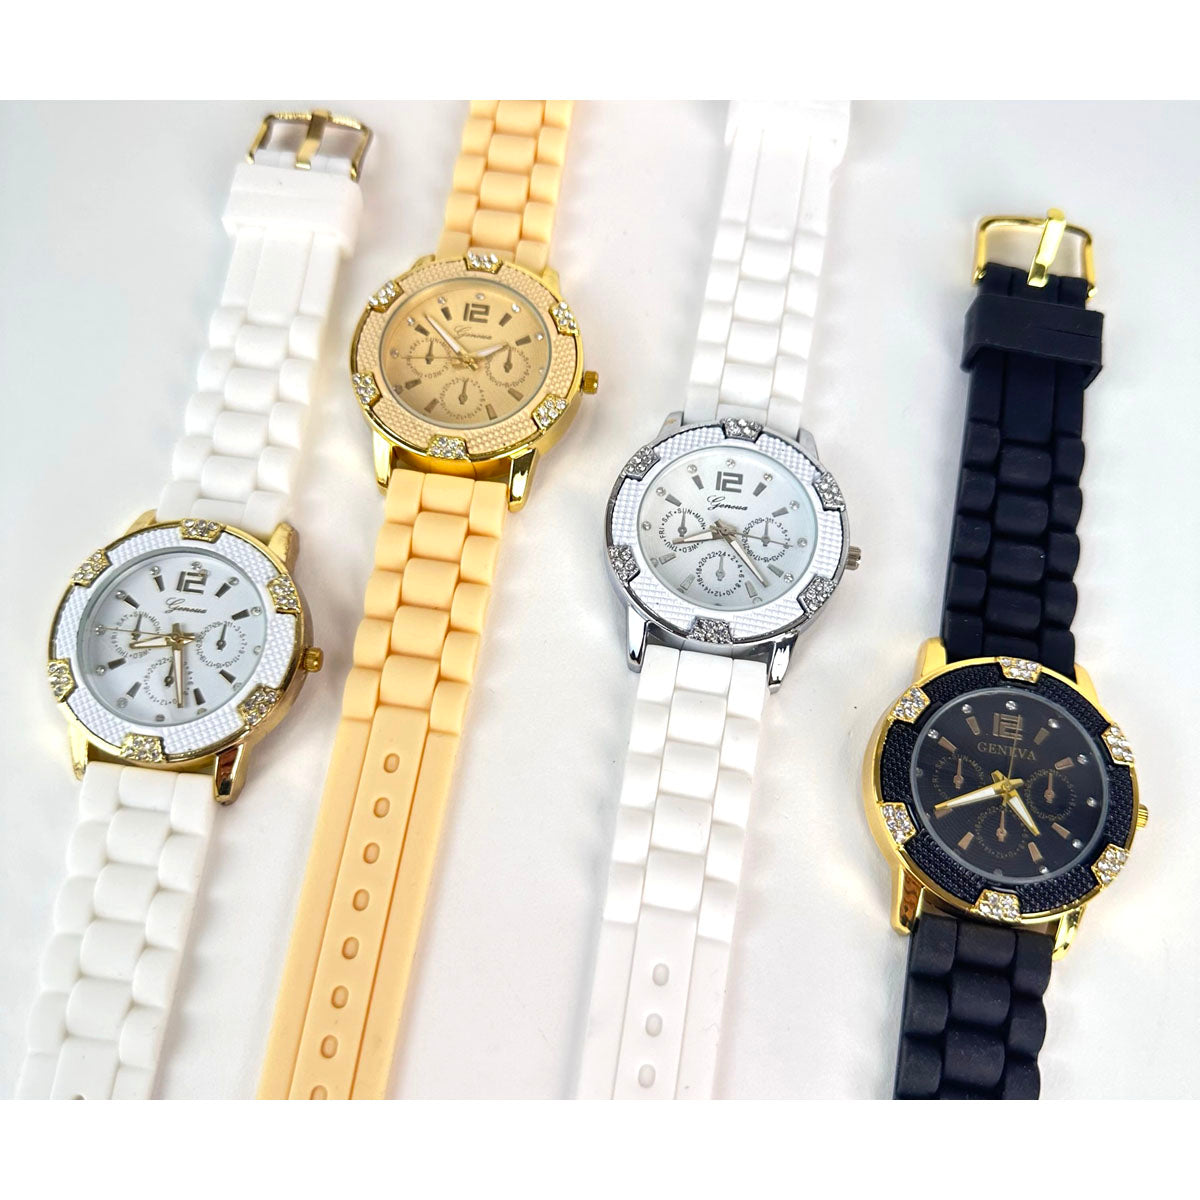 CLEARANCE SALE - Geneva Silicon Band Watch Wholesale 4 Colors